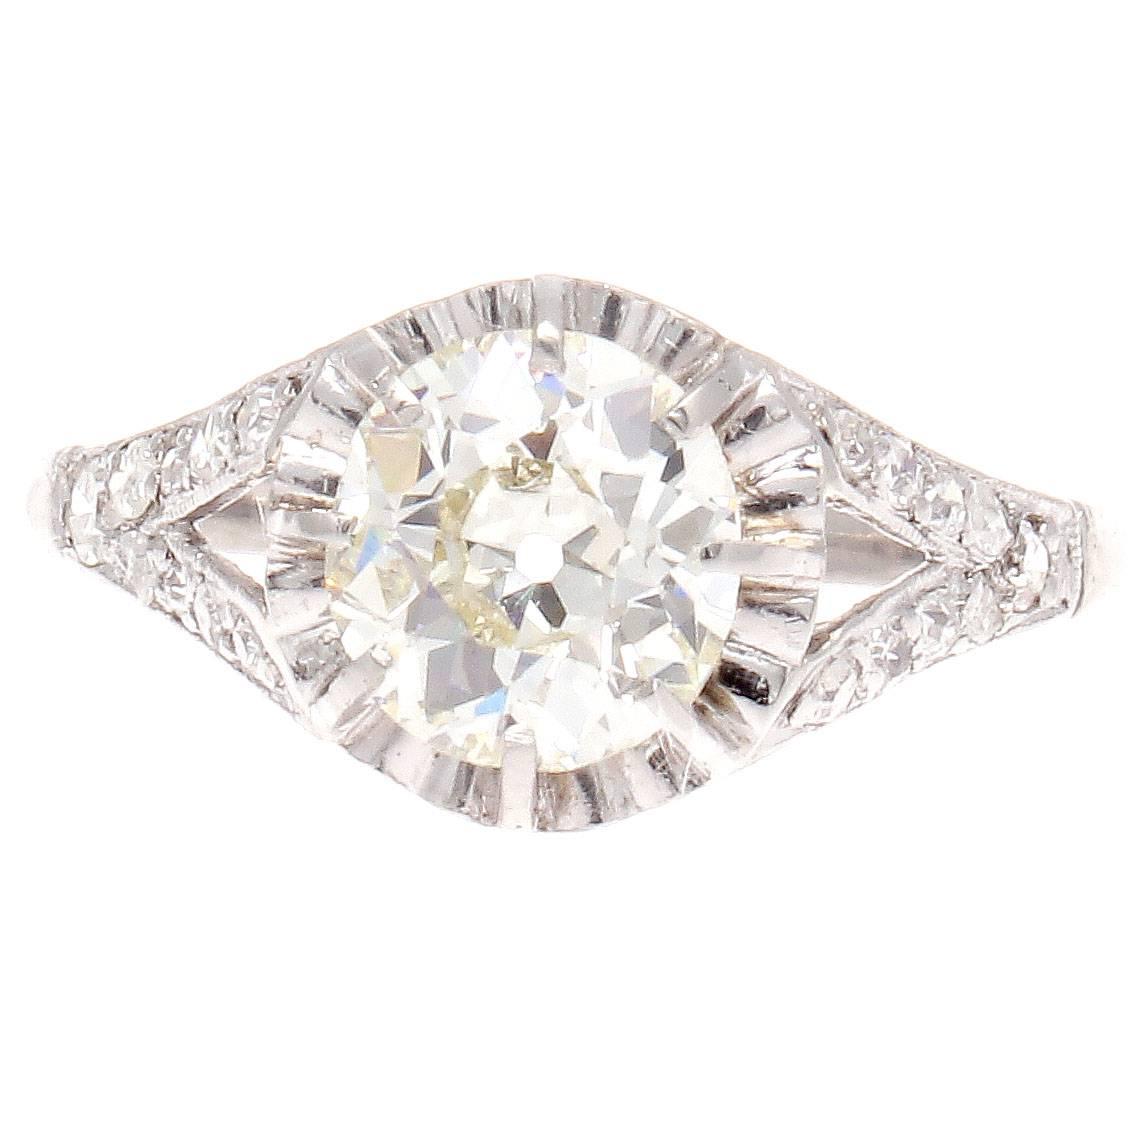 An alluring creation of true elegance capturing the art deco time/period. The center 1.18 carat diamond has been GIA certified as M color and VS1 clarity. The designer has creatively surrounded the diamond with vibrant platinum reflecting the light